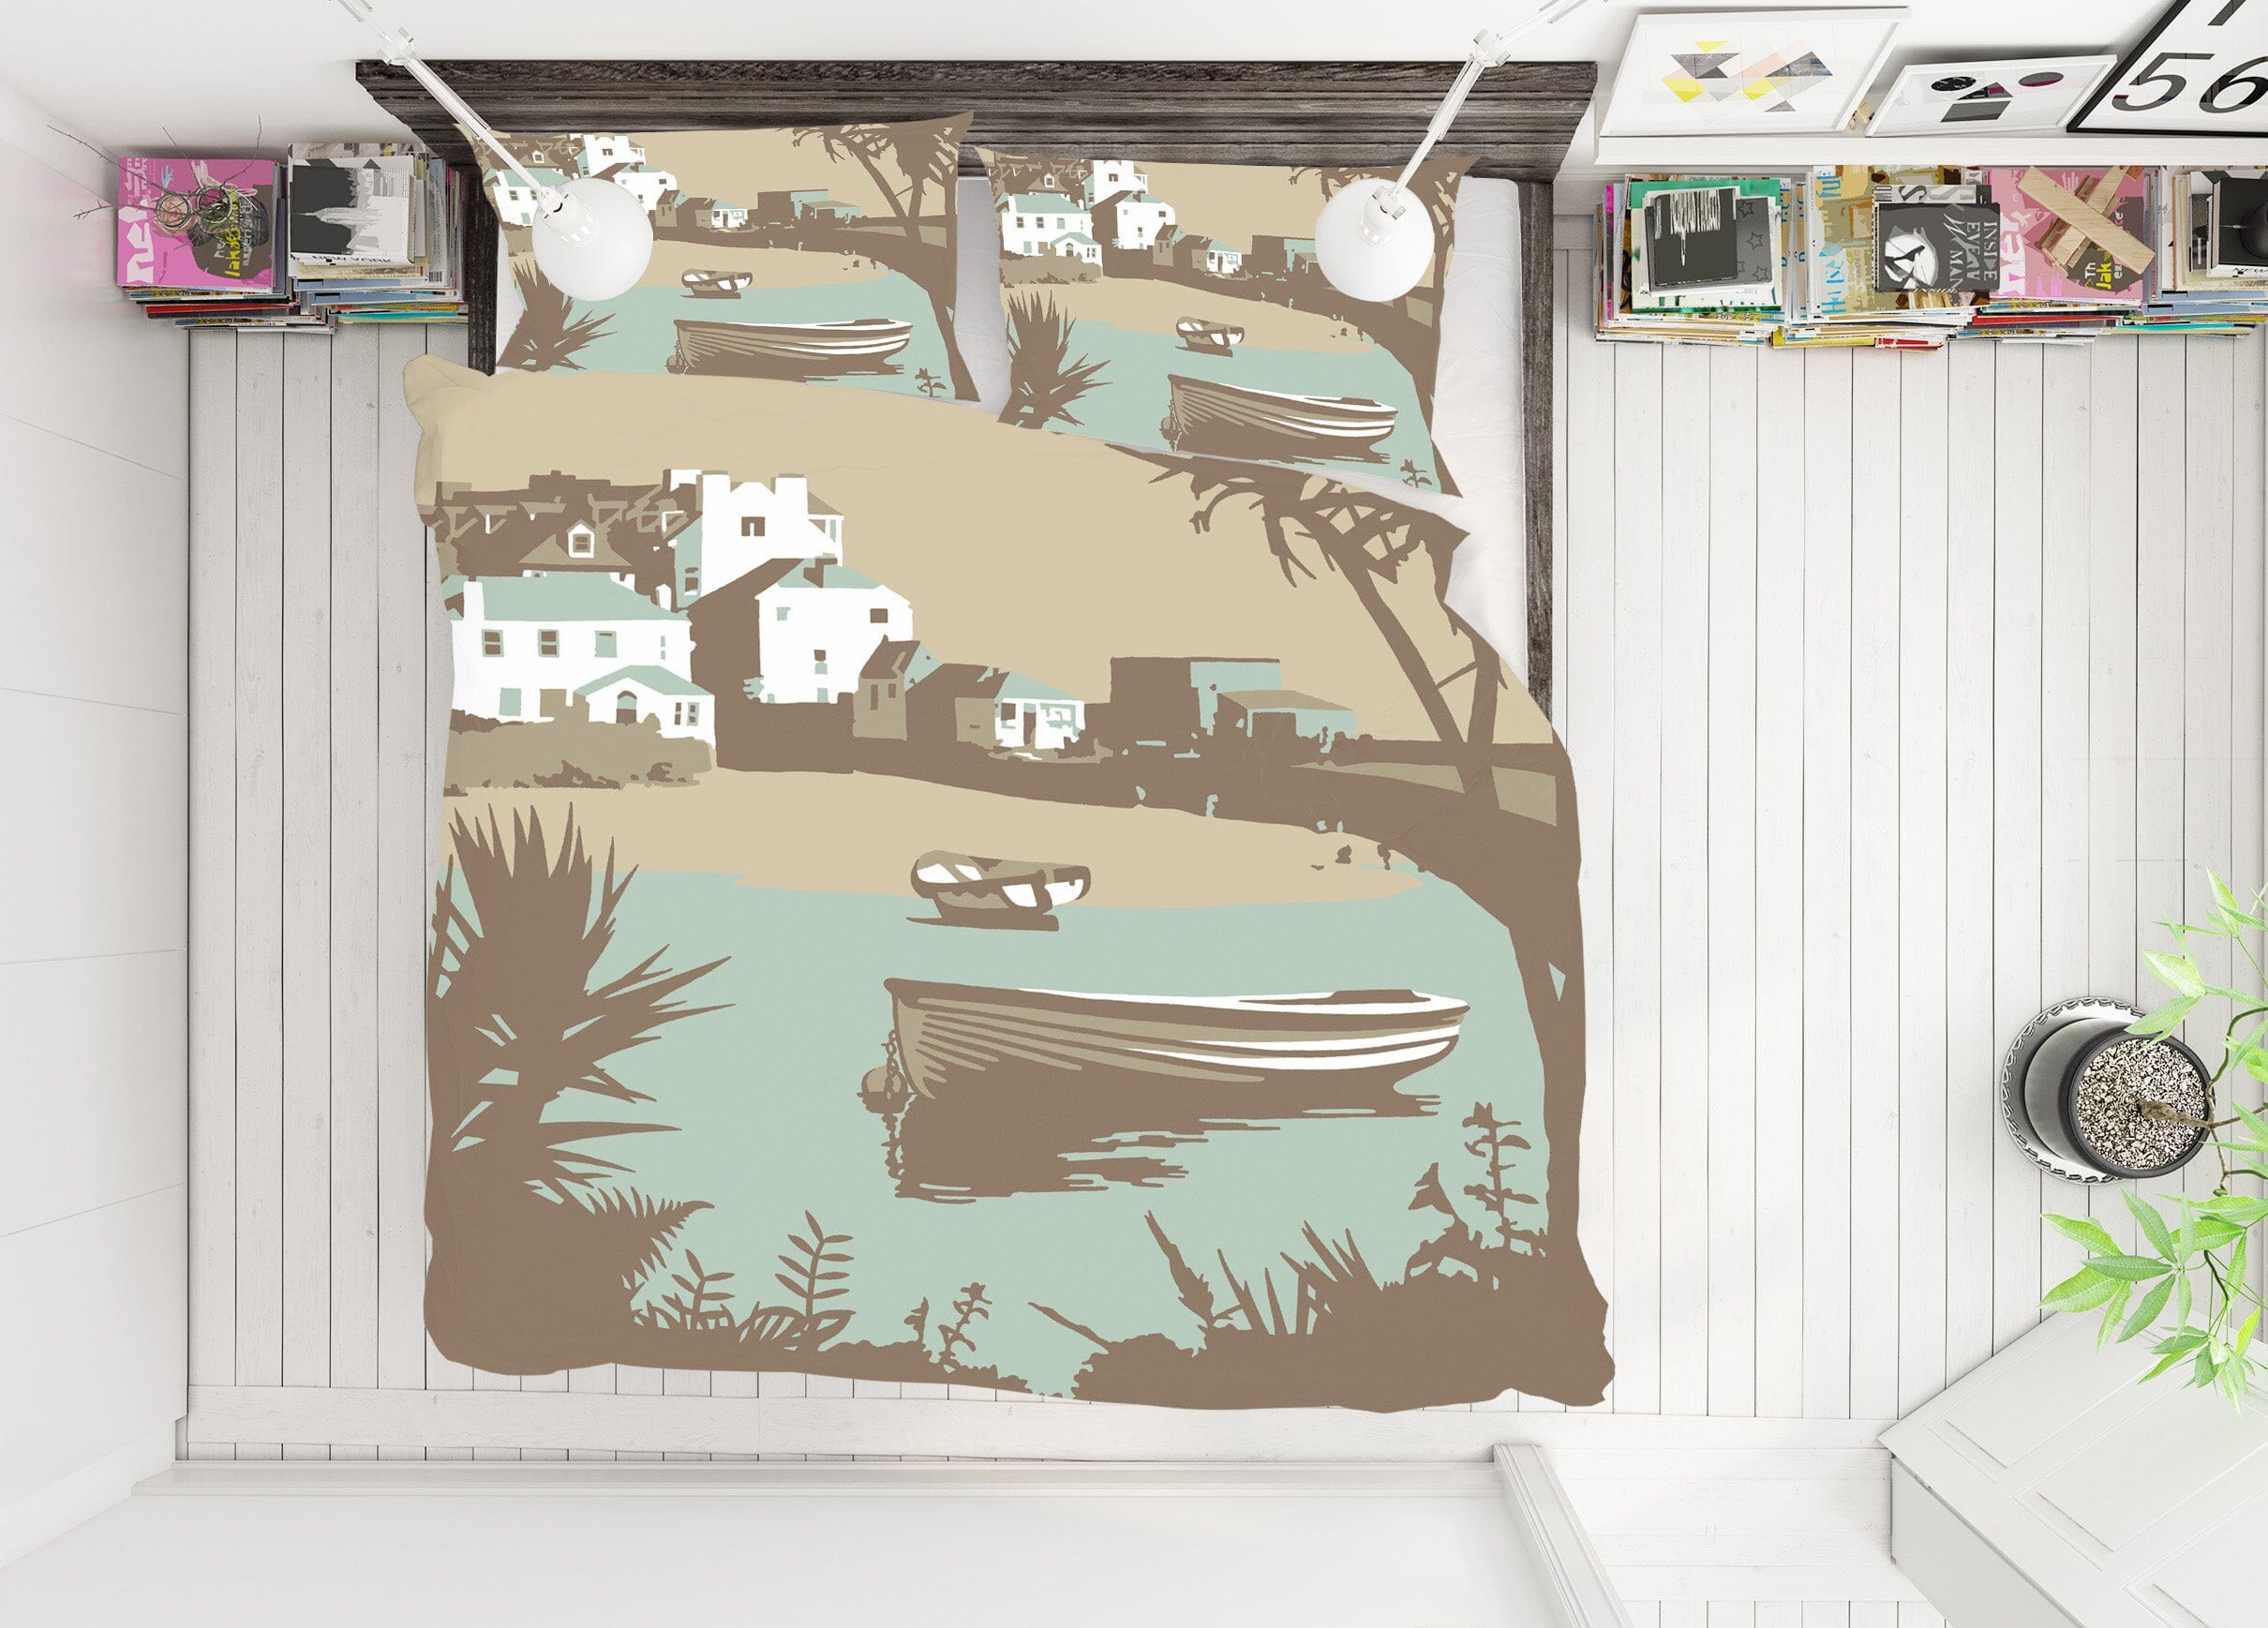 3D River Boat 2065 Steve Read Bedding Bed Pillowcases Quilt Quiet Covers AJ Creativity Home 